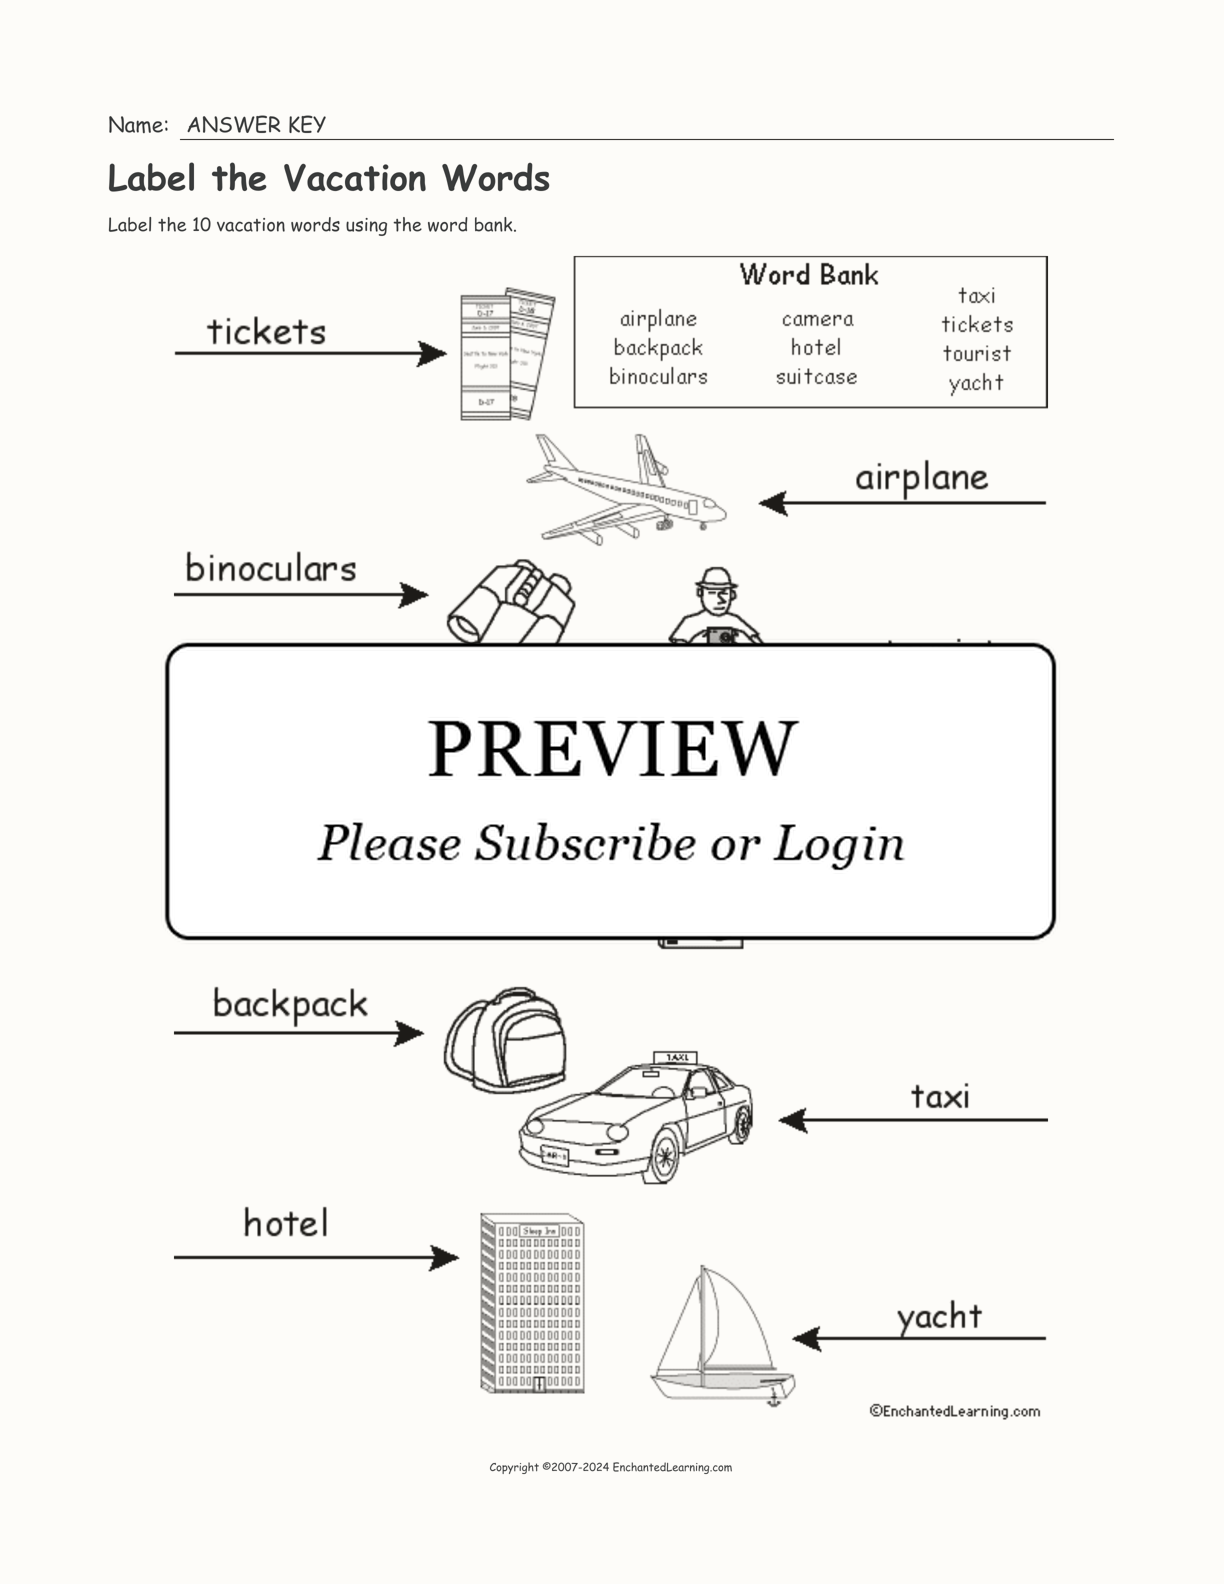 Label the Vacation Words interactive worksheet page 2